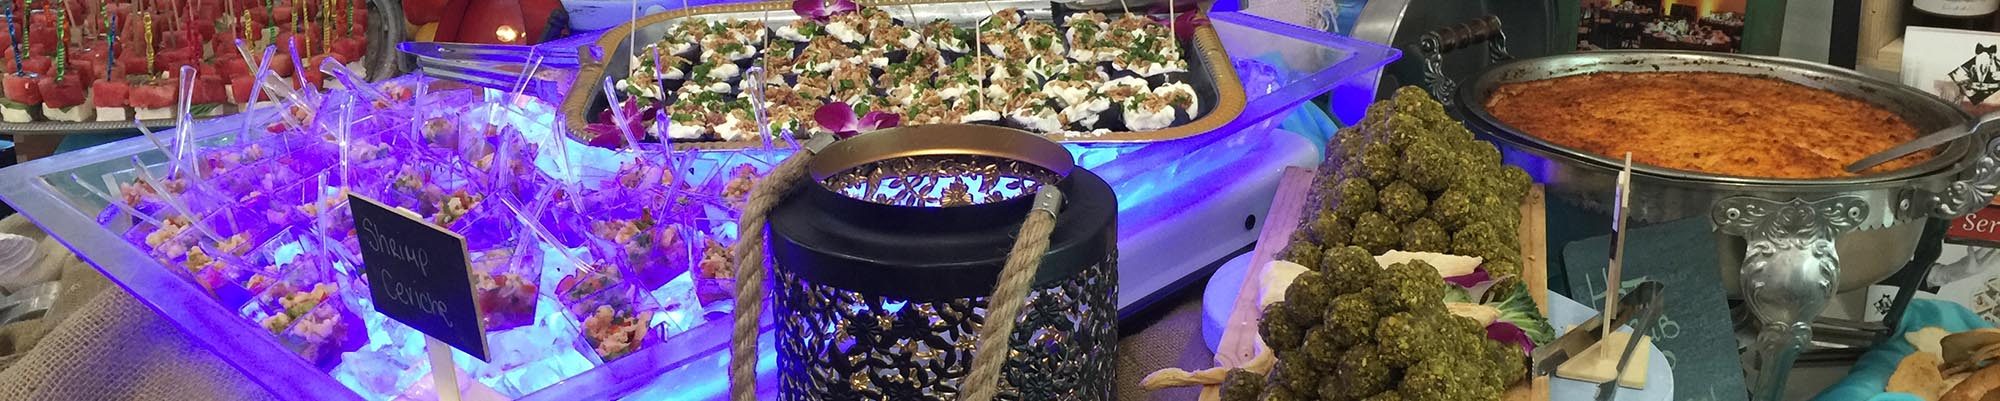 Corporate Catering Palm Harbor